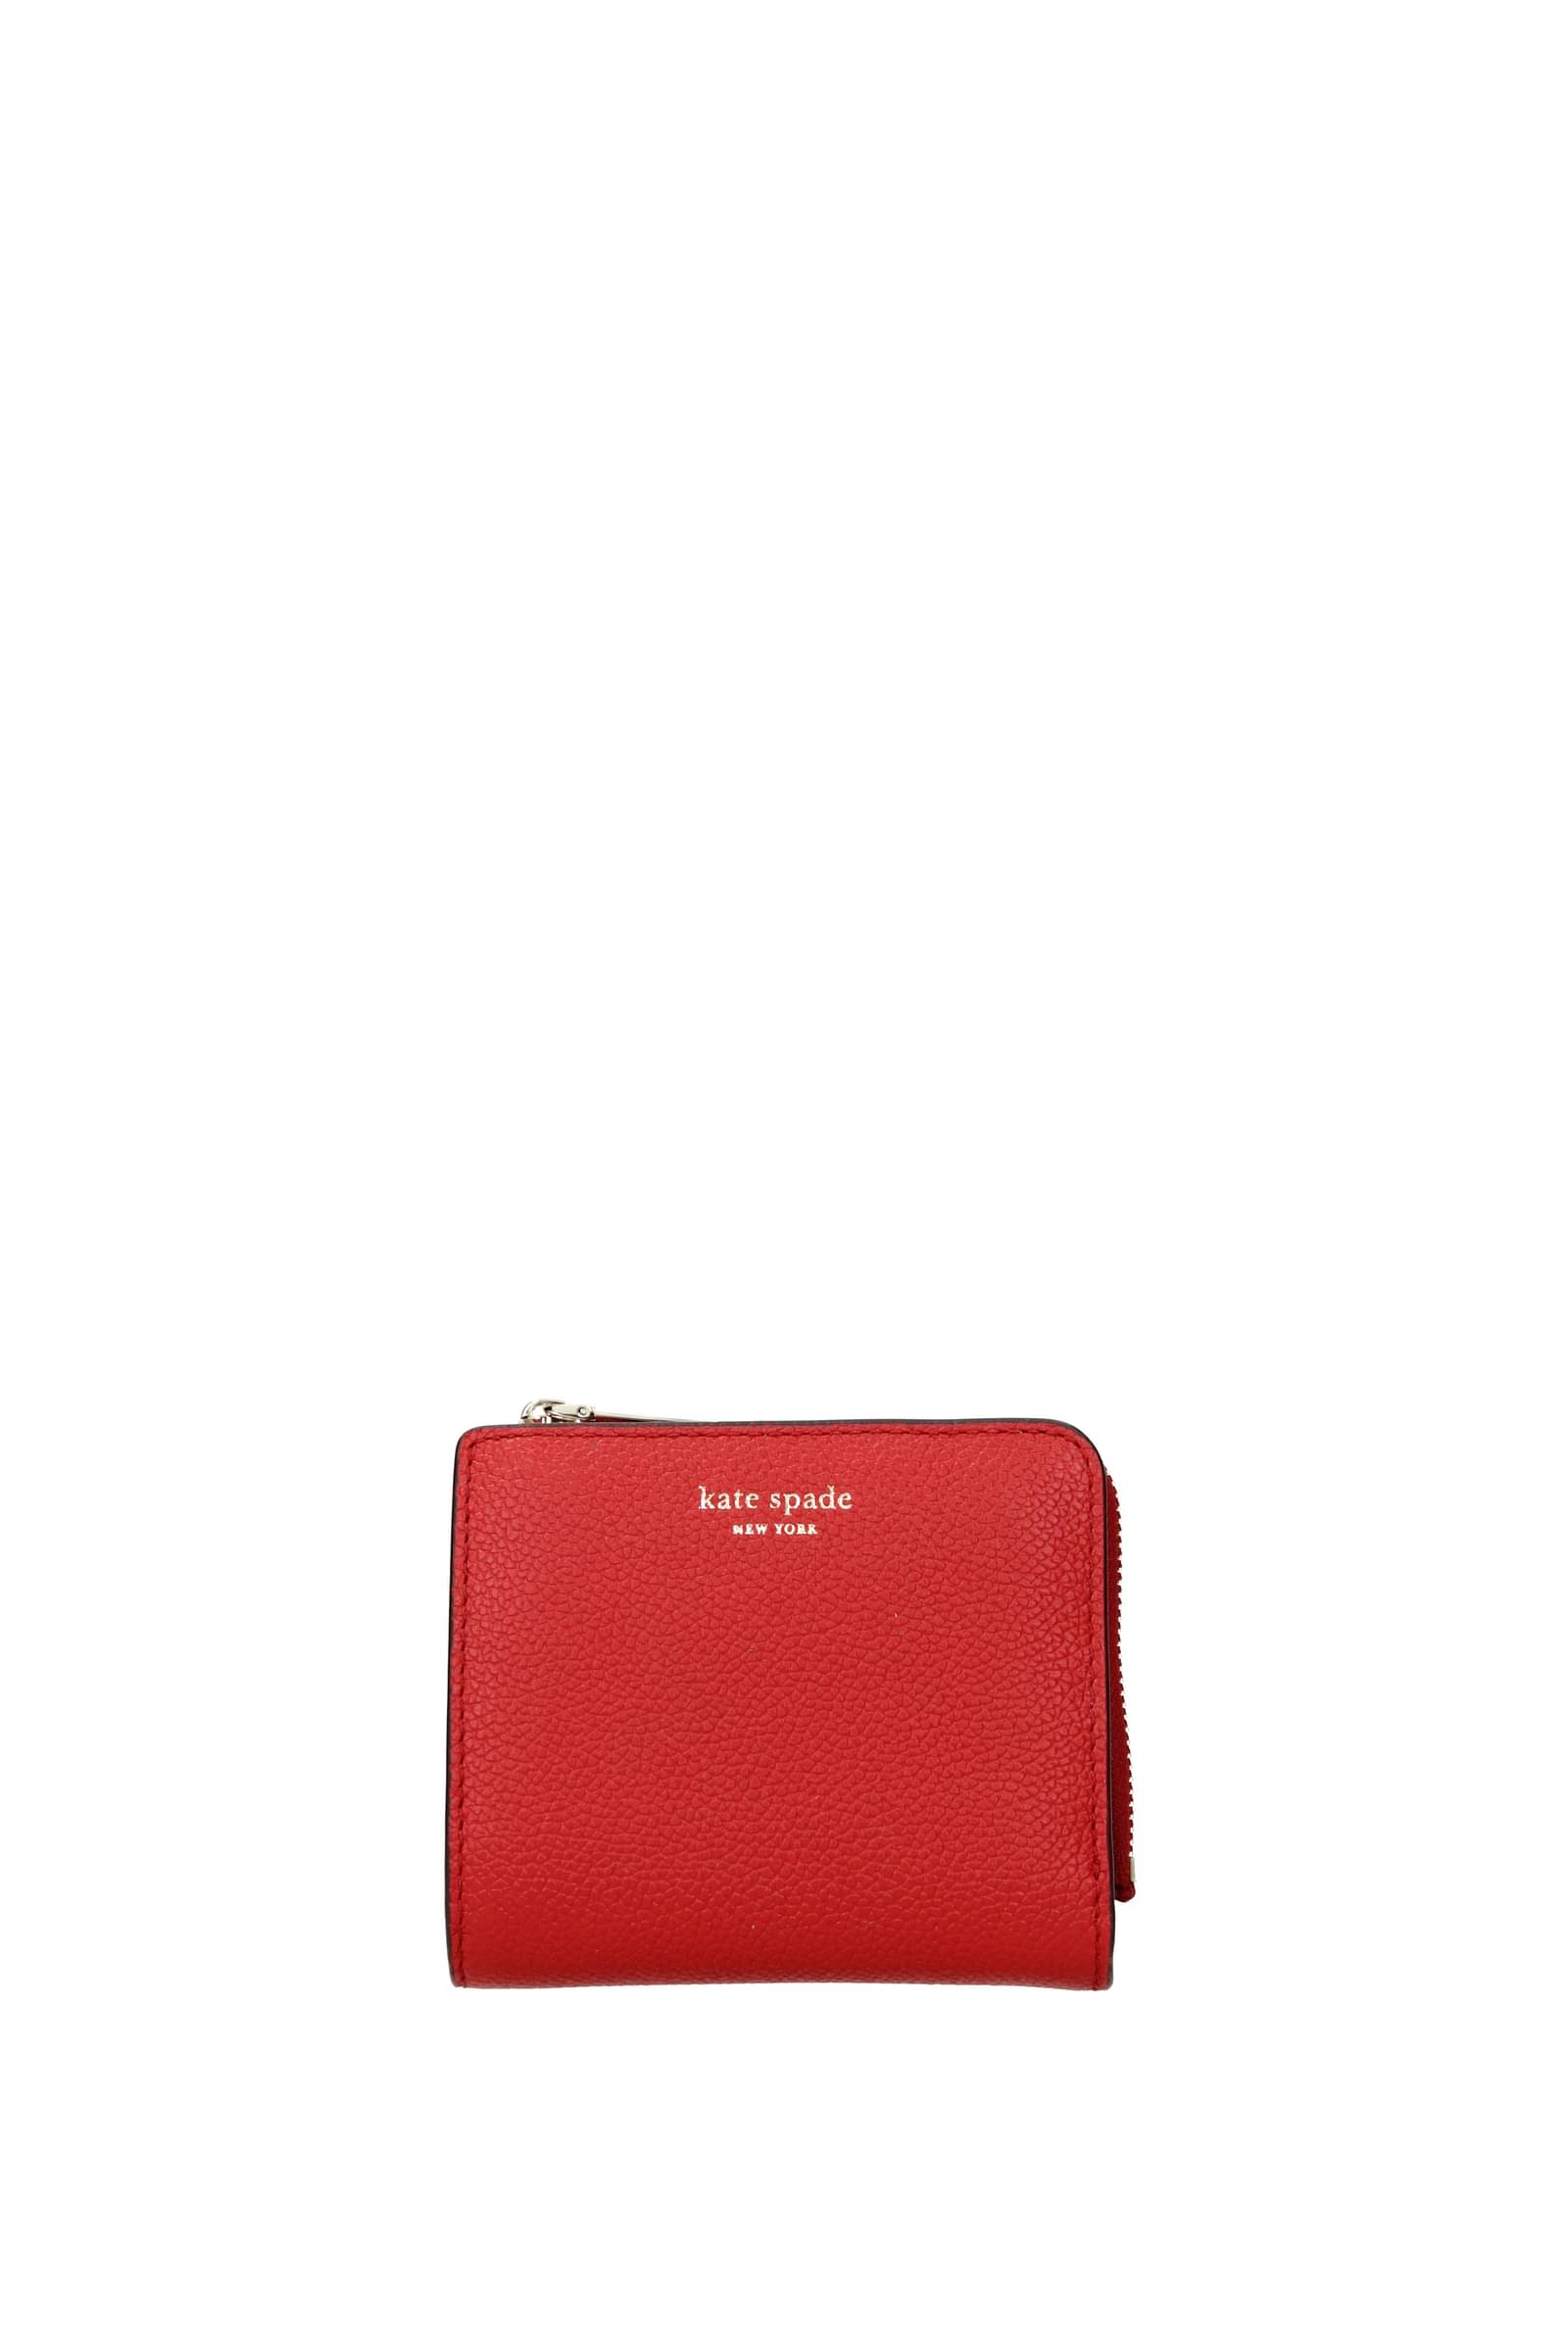 Kate Spade Wallets Leather Red Chili Pepper | ModeSens